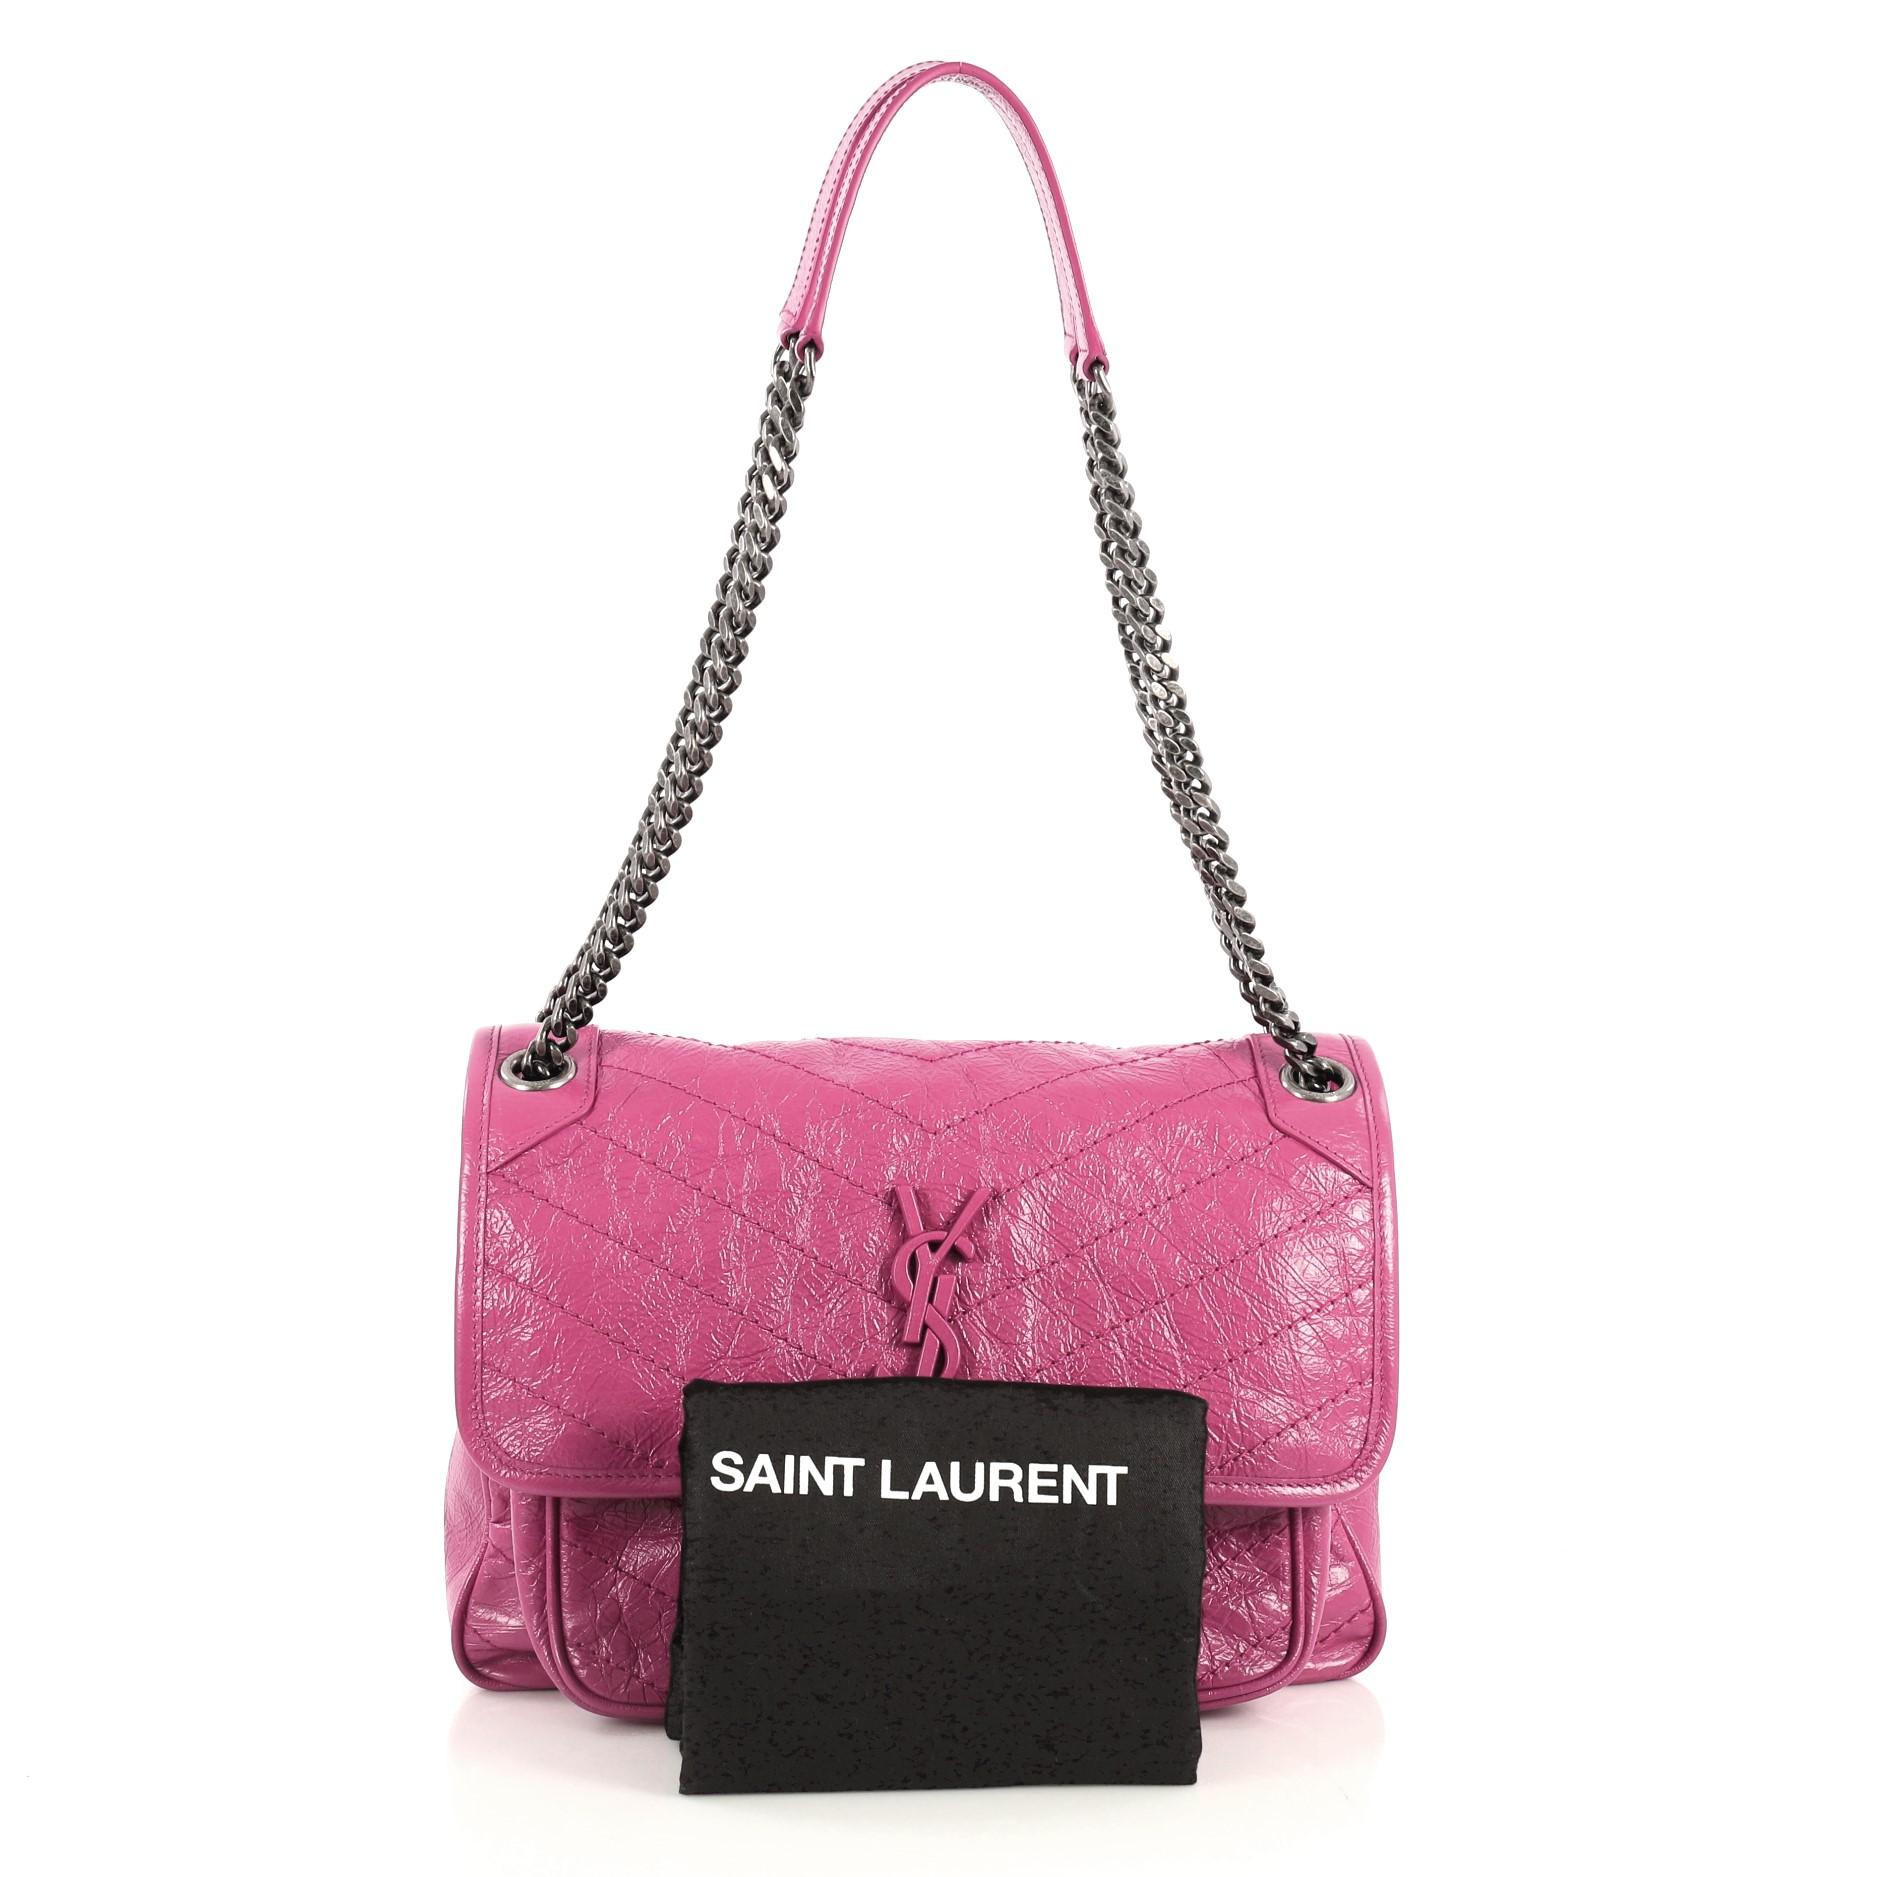 This Saint Laurent Niki Chain Flap Bag Matelasse Chevron Leather Medium, crafted in pink matelasse chevron leather, features chain link shoulder strap with shoulder pad, frontal flap with YSL monogram detail and aged silver-tone hardware. Its